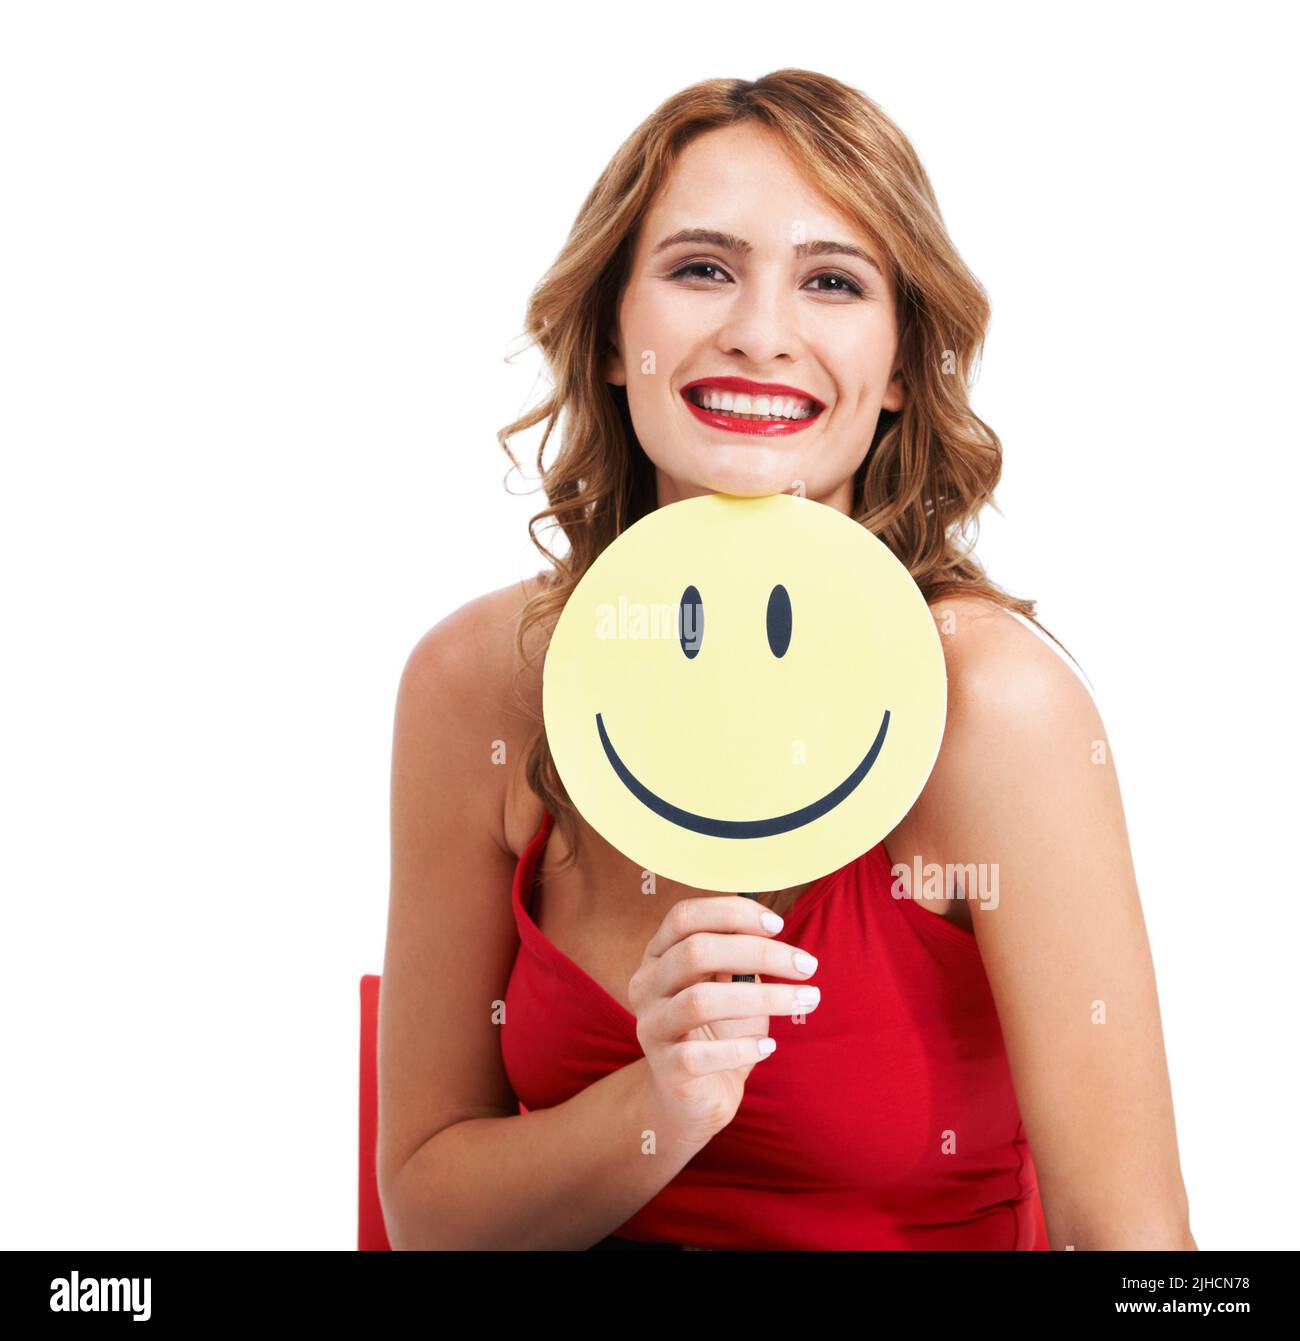 Give the world your widest smile. A charismatic young woman holding a paddle with a smiley face on it. Stock Photo